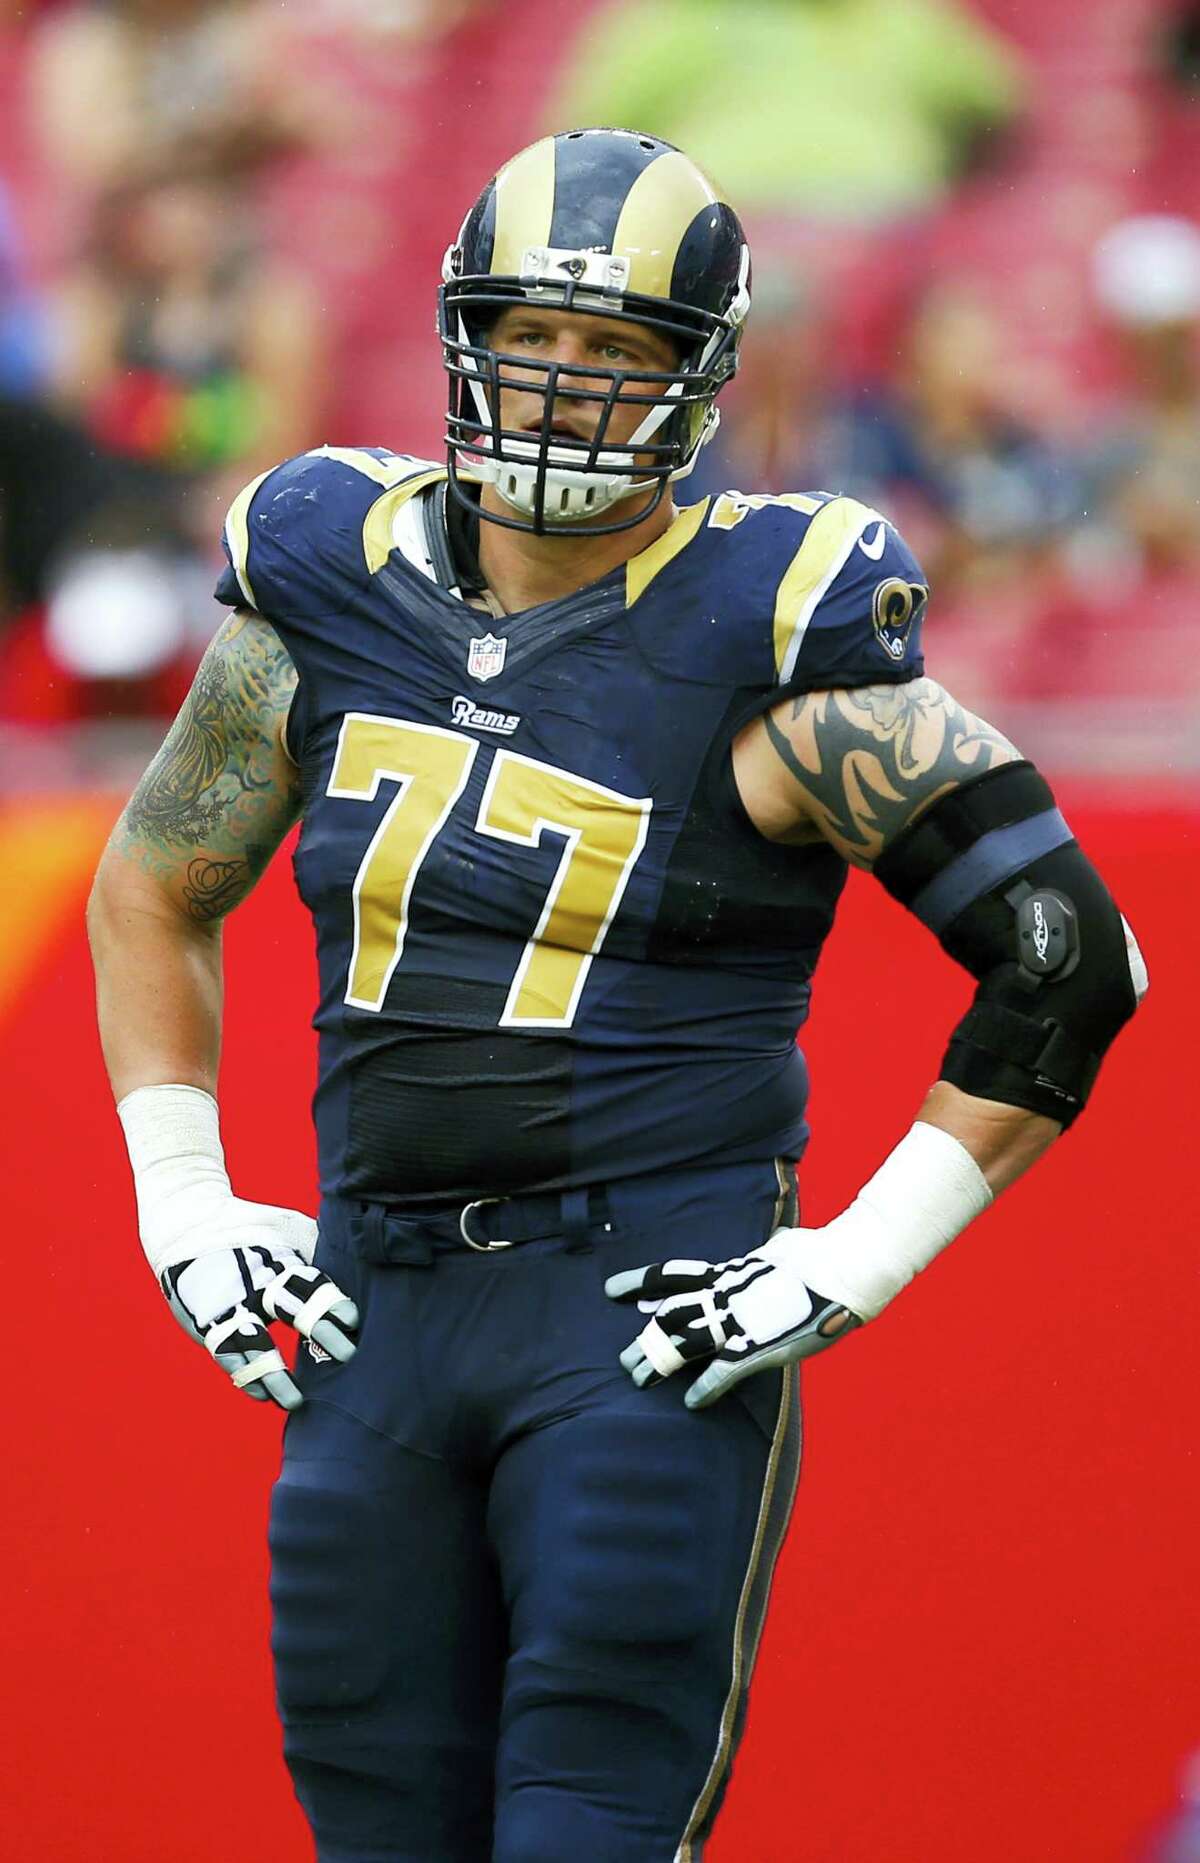 In this Sept. 14, 2014 photo, St. Louis Rams tackle Jake Long (77) lines-up against the Tampa Bay Buccaneers, during an NFL game in Tampa, Fla. The Minnesota Vikings have signed offensive tackle Jake Long, a former first overall draft pick recently beset by injuries.